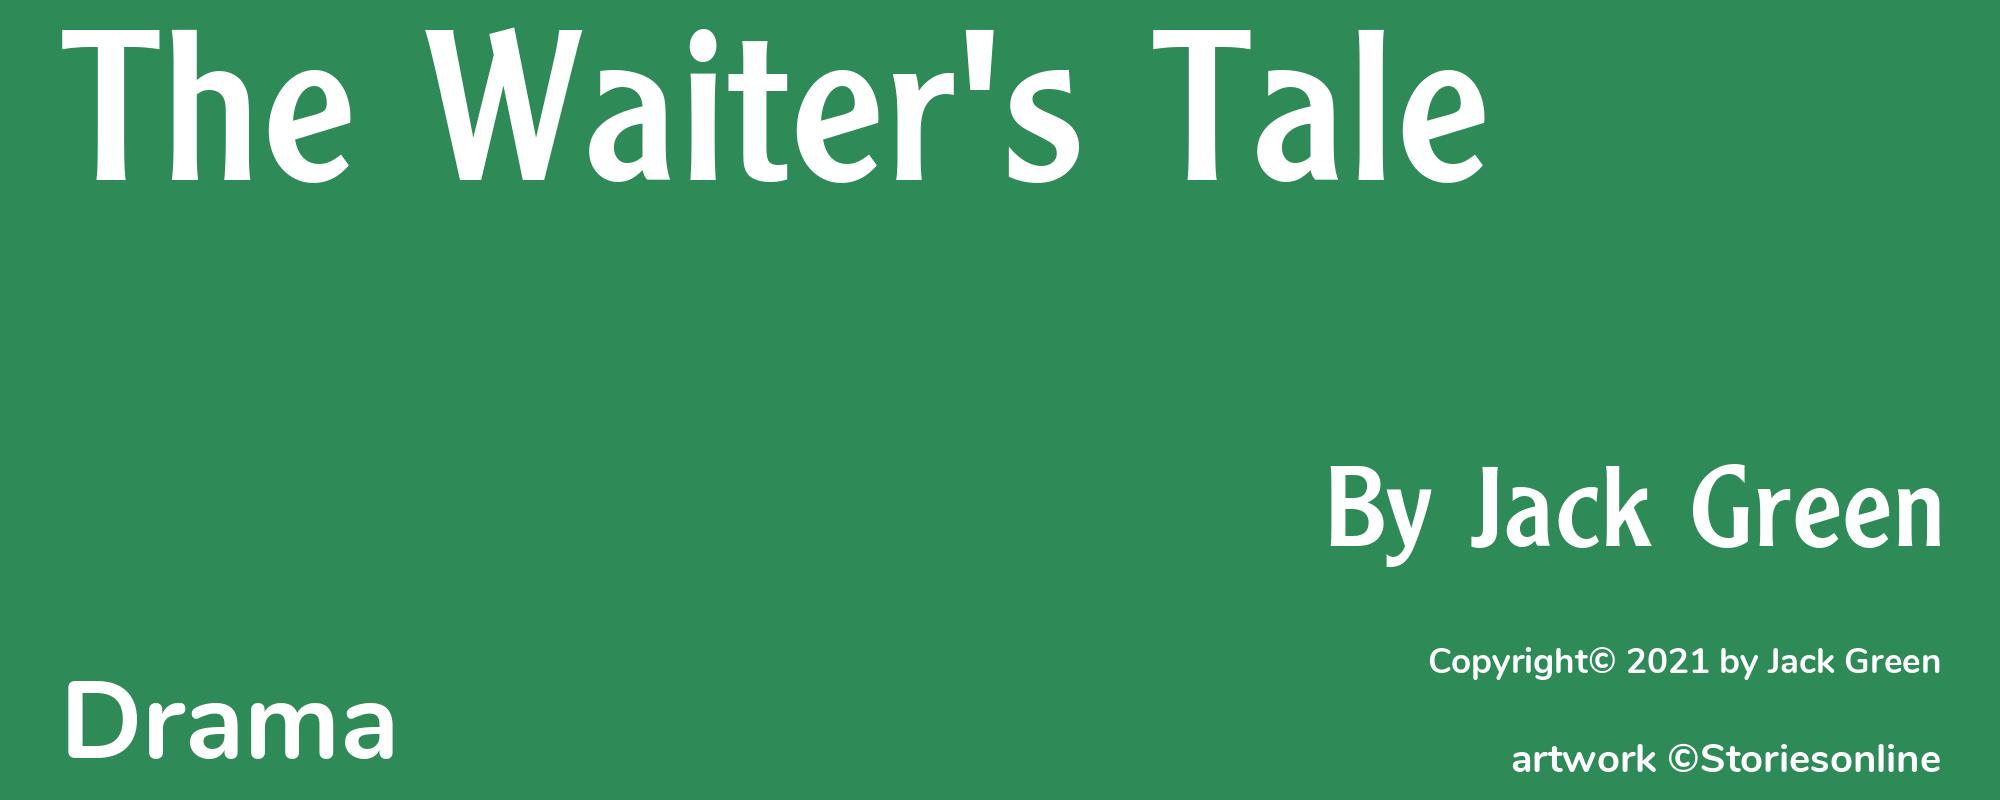 The Waiter's Tale - Cover